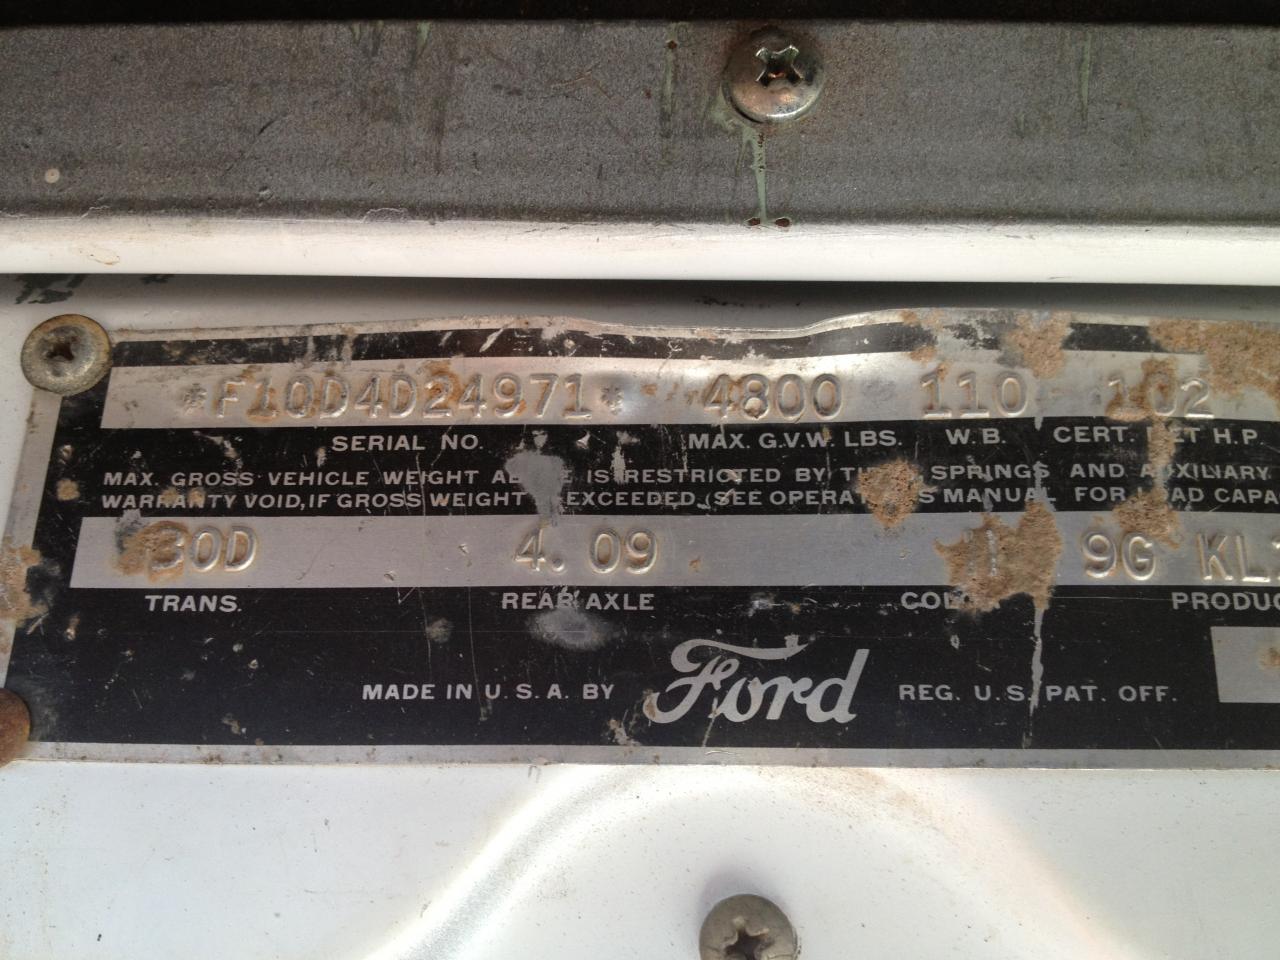 1954 Ford vehicle identification numbers #3